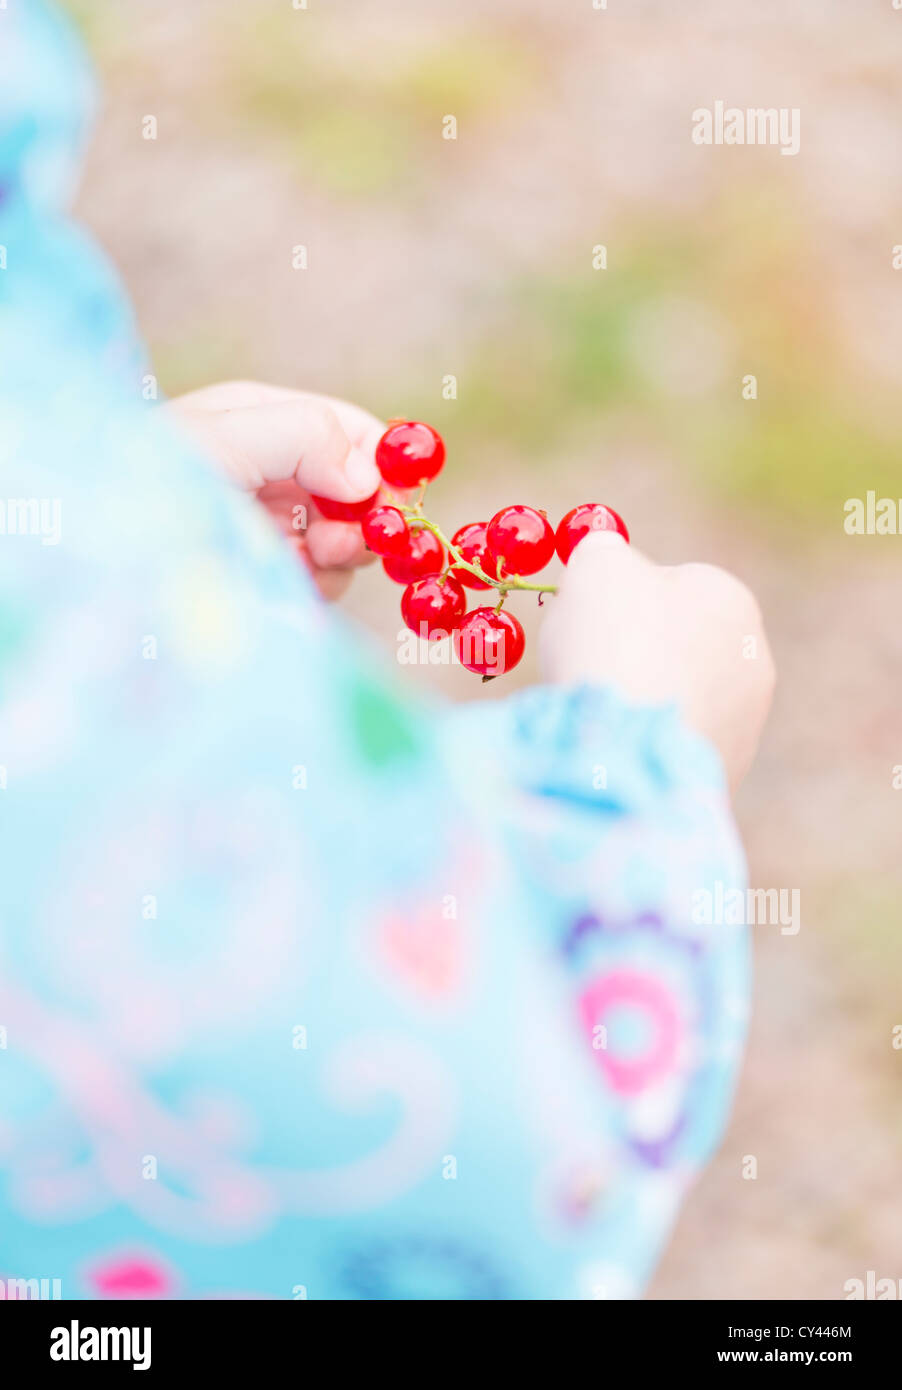 Child watching red currant branch Stock Photo